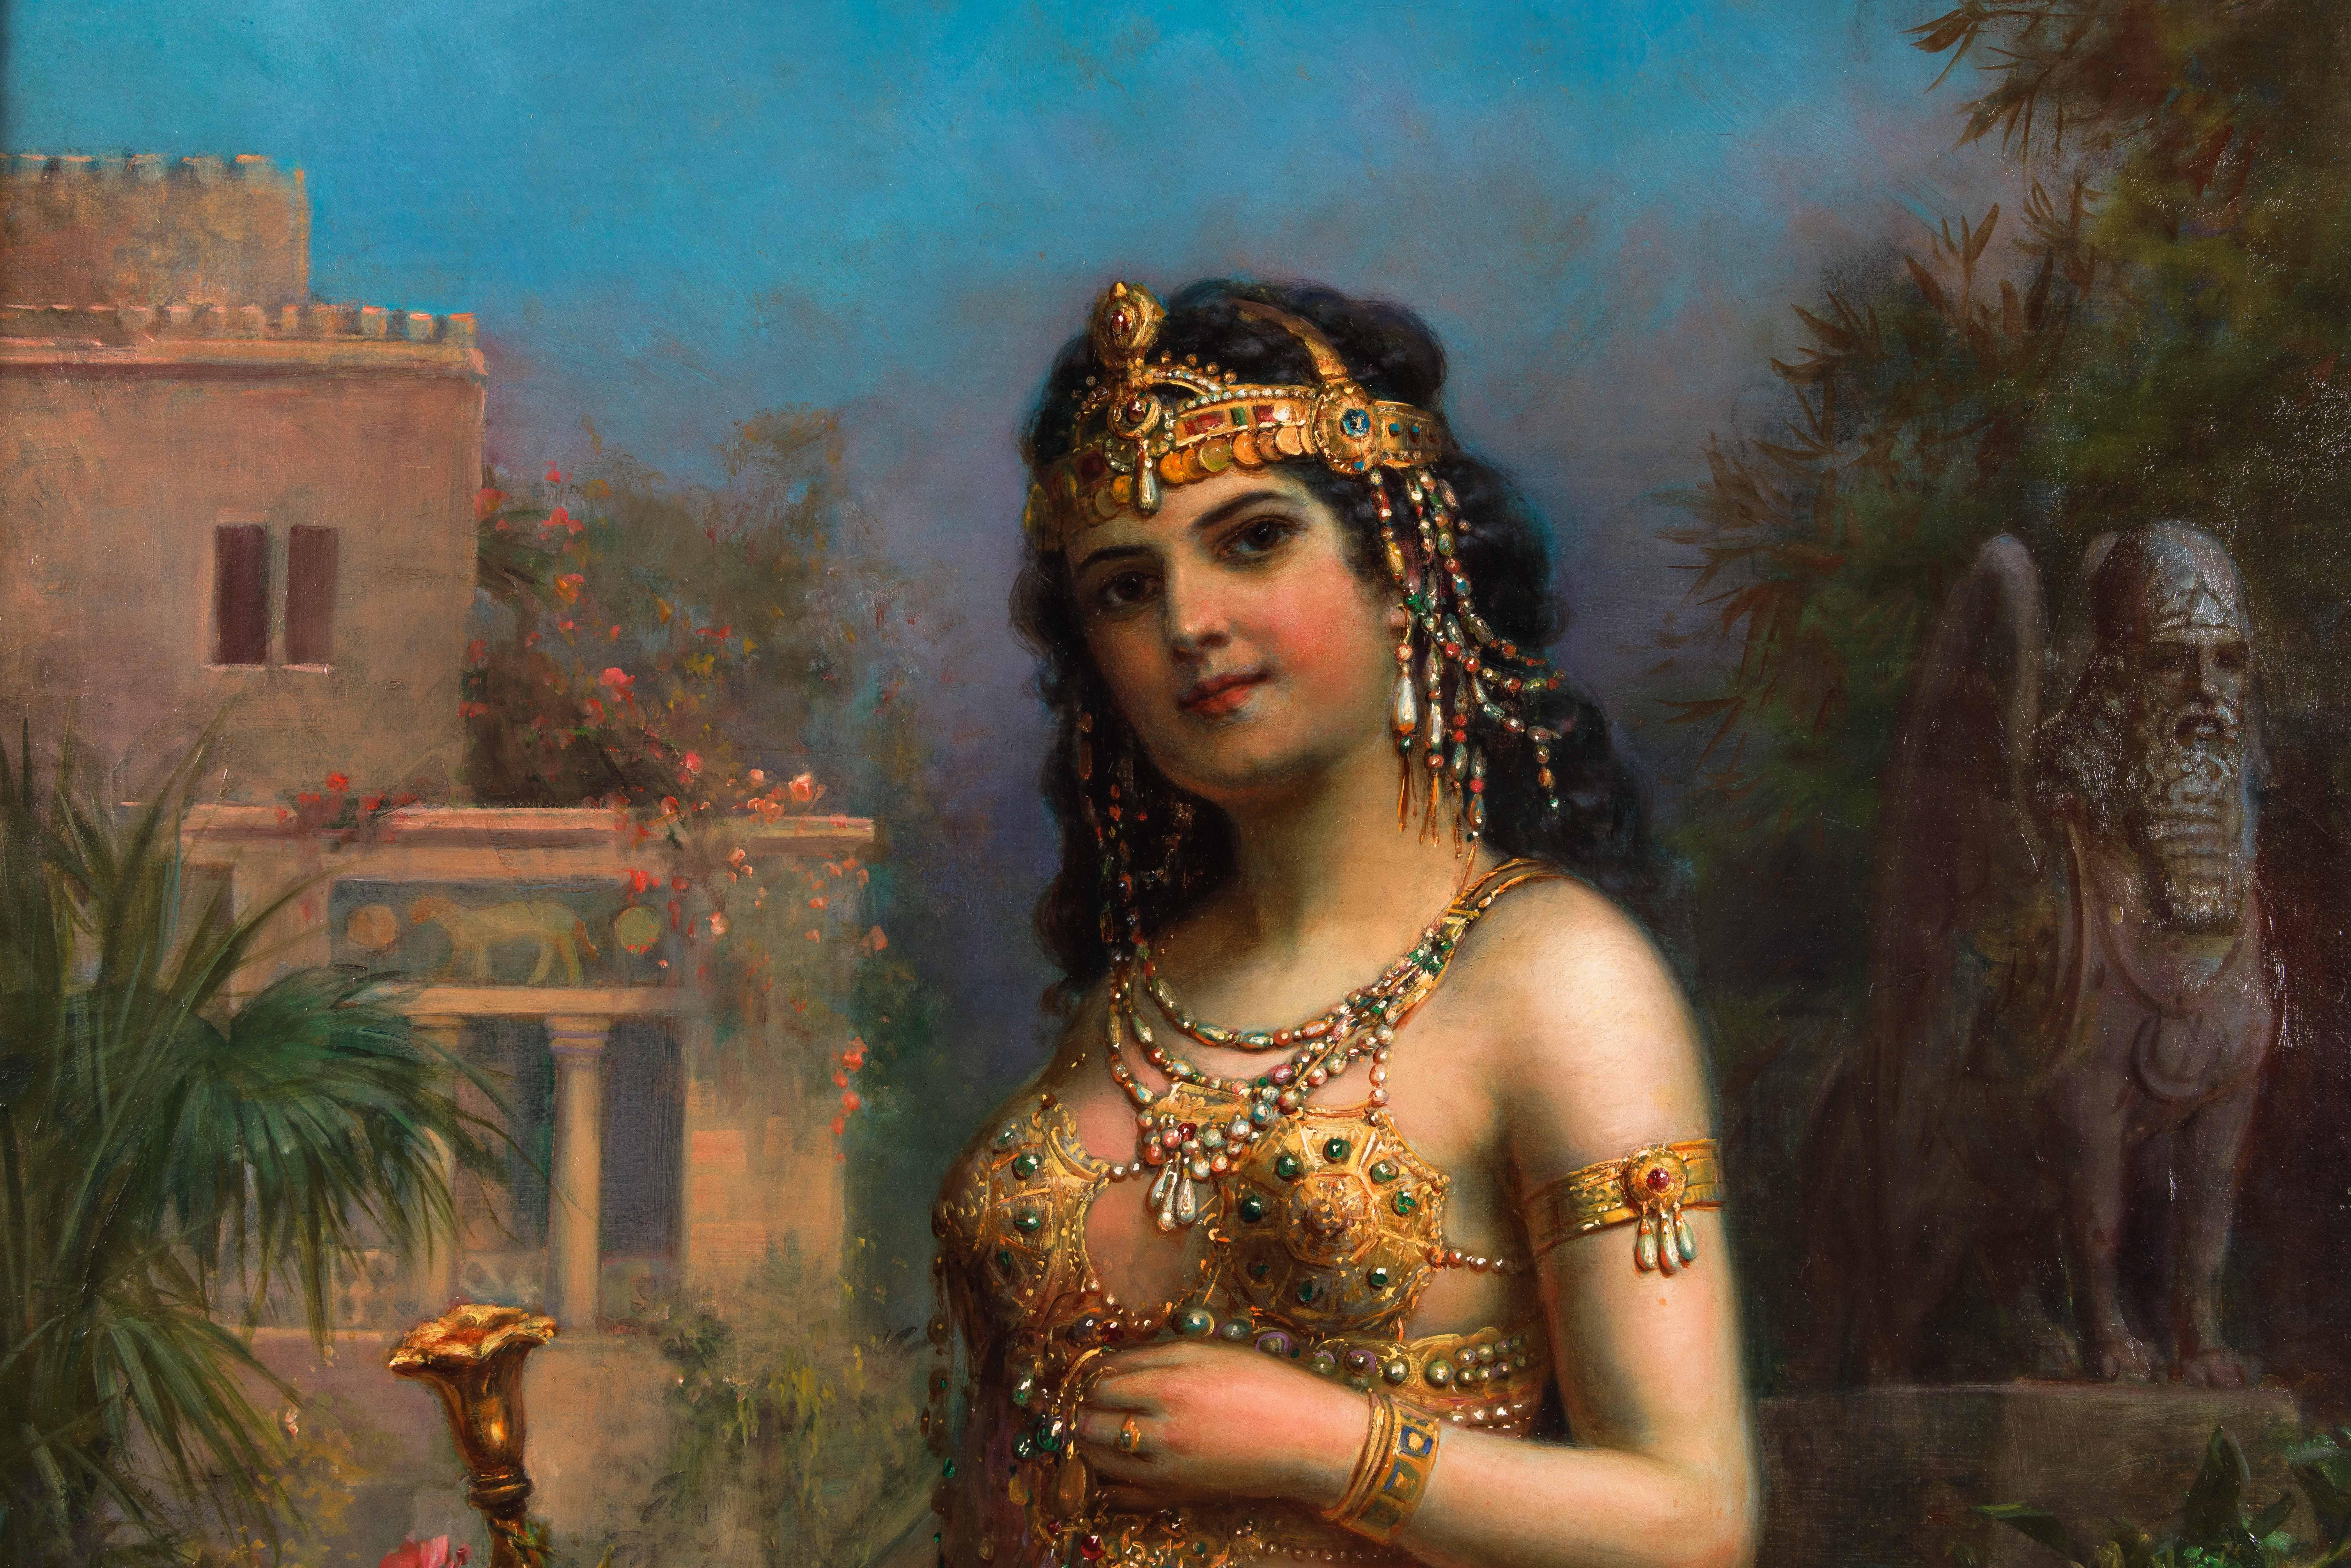 Emanuel Oberhauser (Austrian, 1854-1919) an exceptional quality full length oil on canvas painting of a Young Orientalist Queen or Odalisque, 19th century, circa 1885

Masterfully painted, this artwork depicts a full length portrait of a young